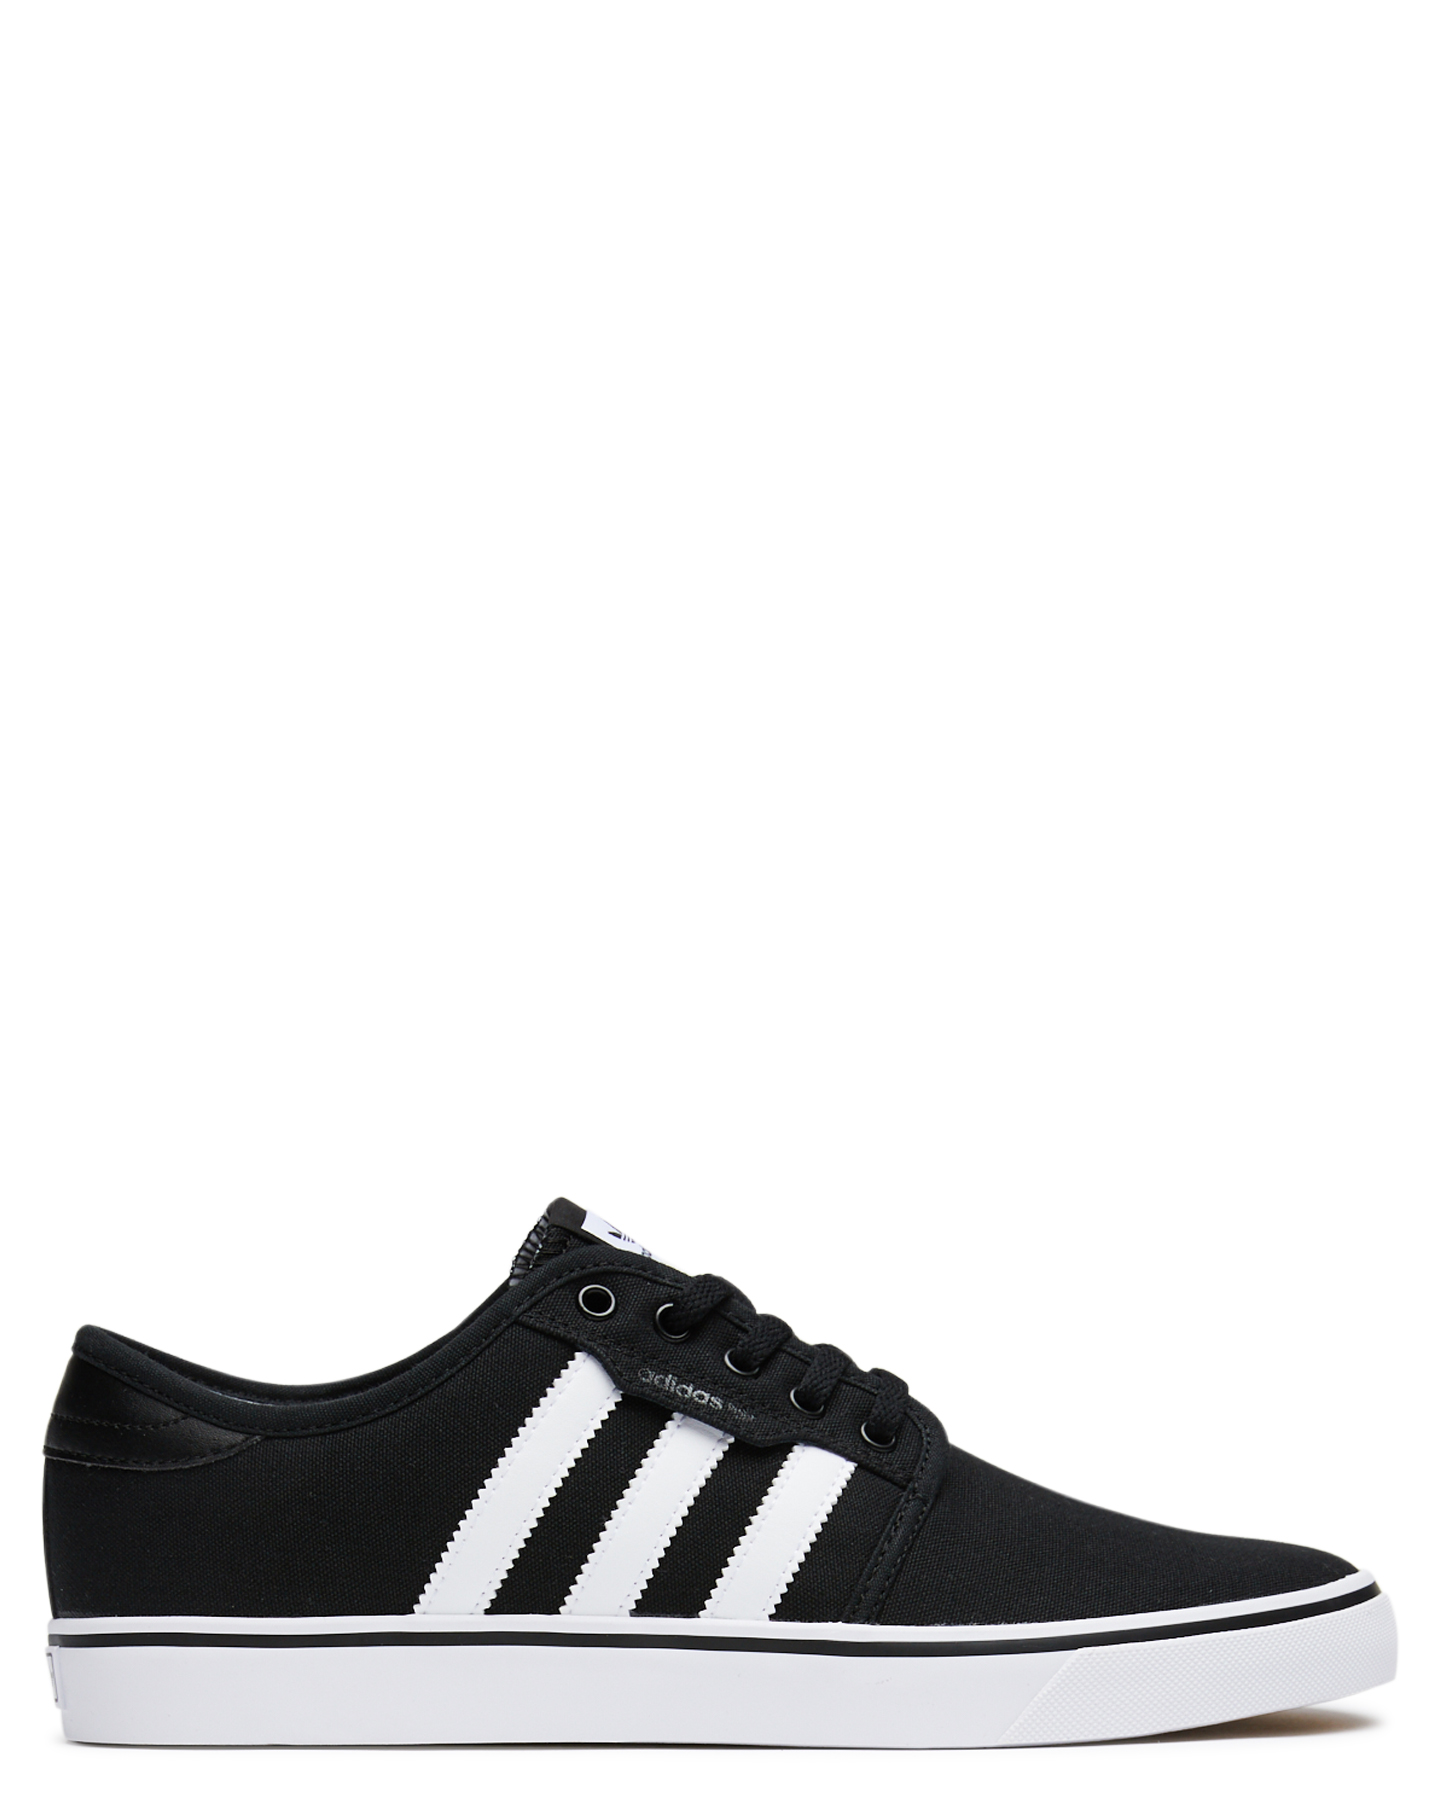 womens adidas sneakers black and white